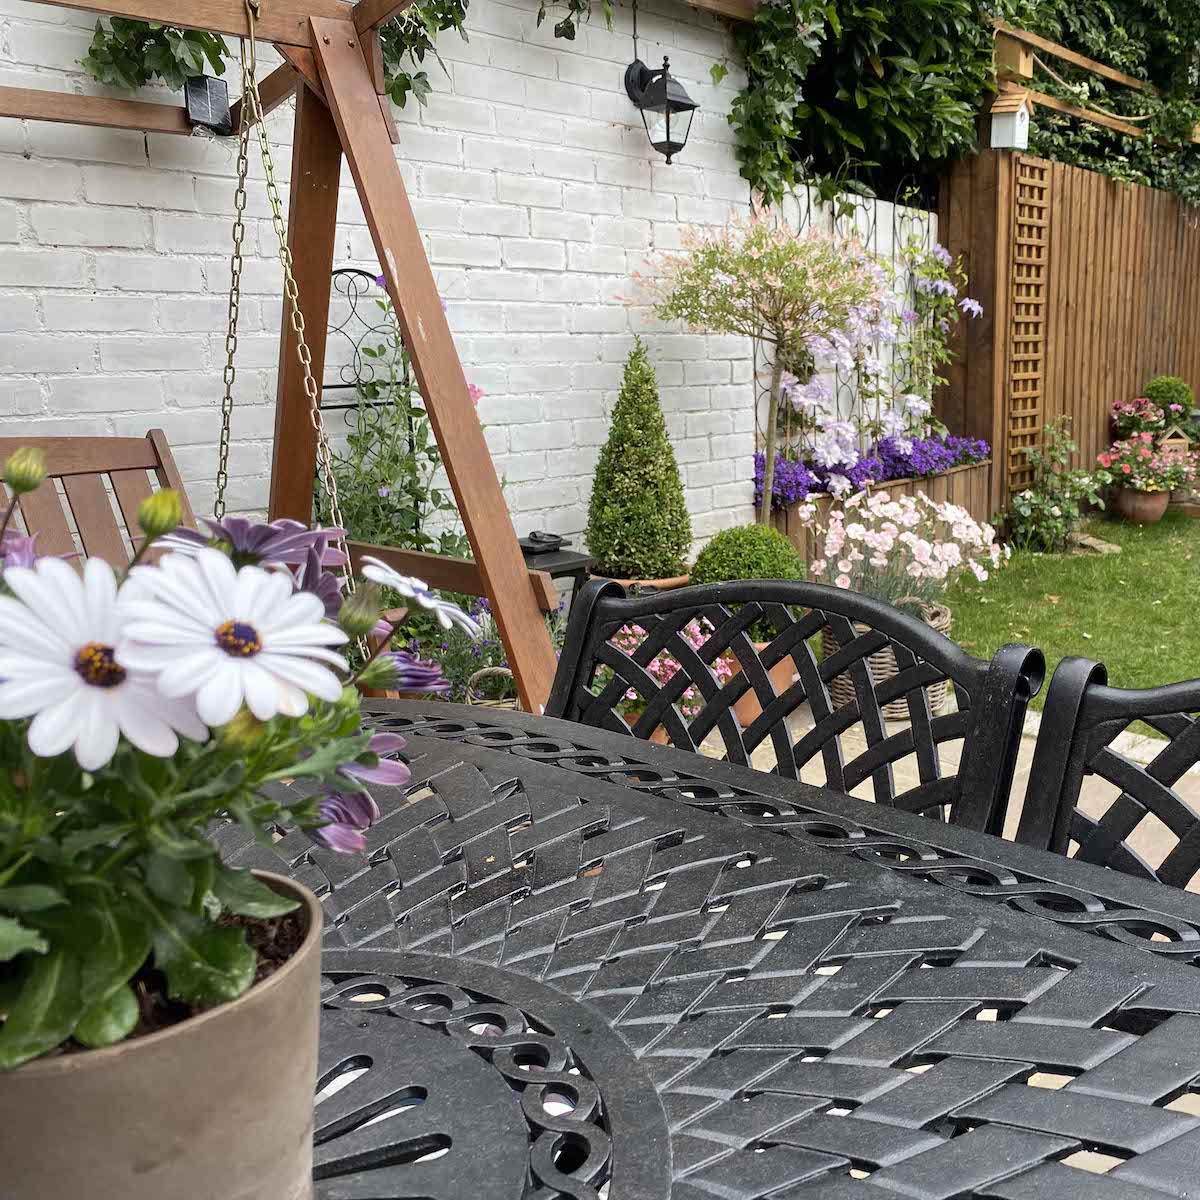 Why apply car wax to our metal garden furniture